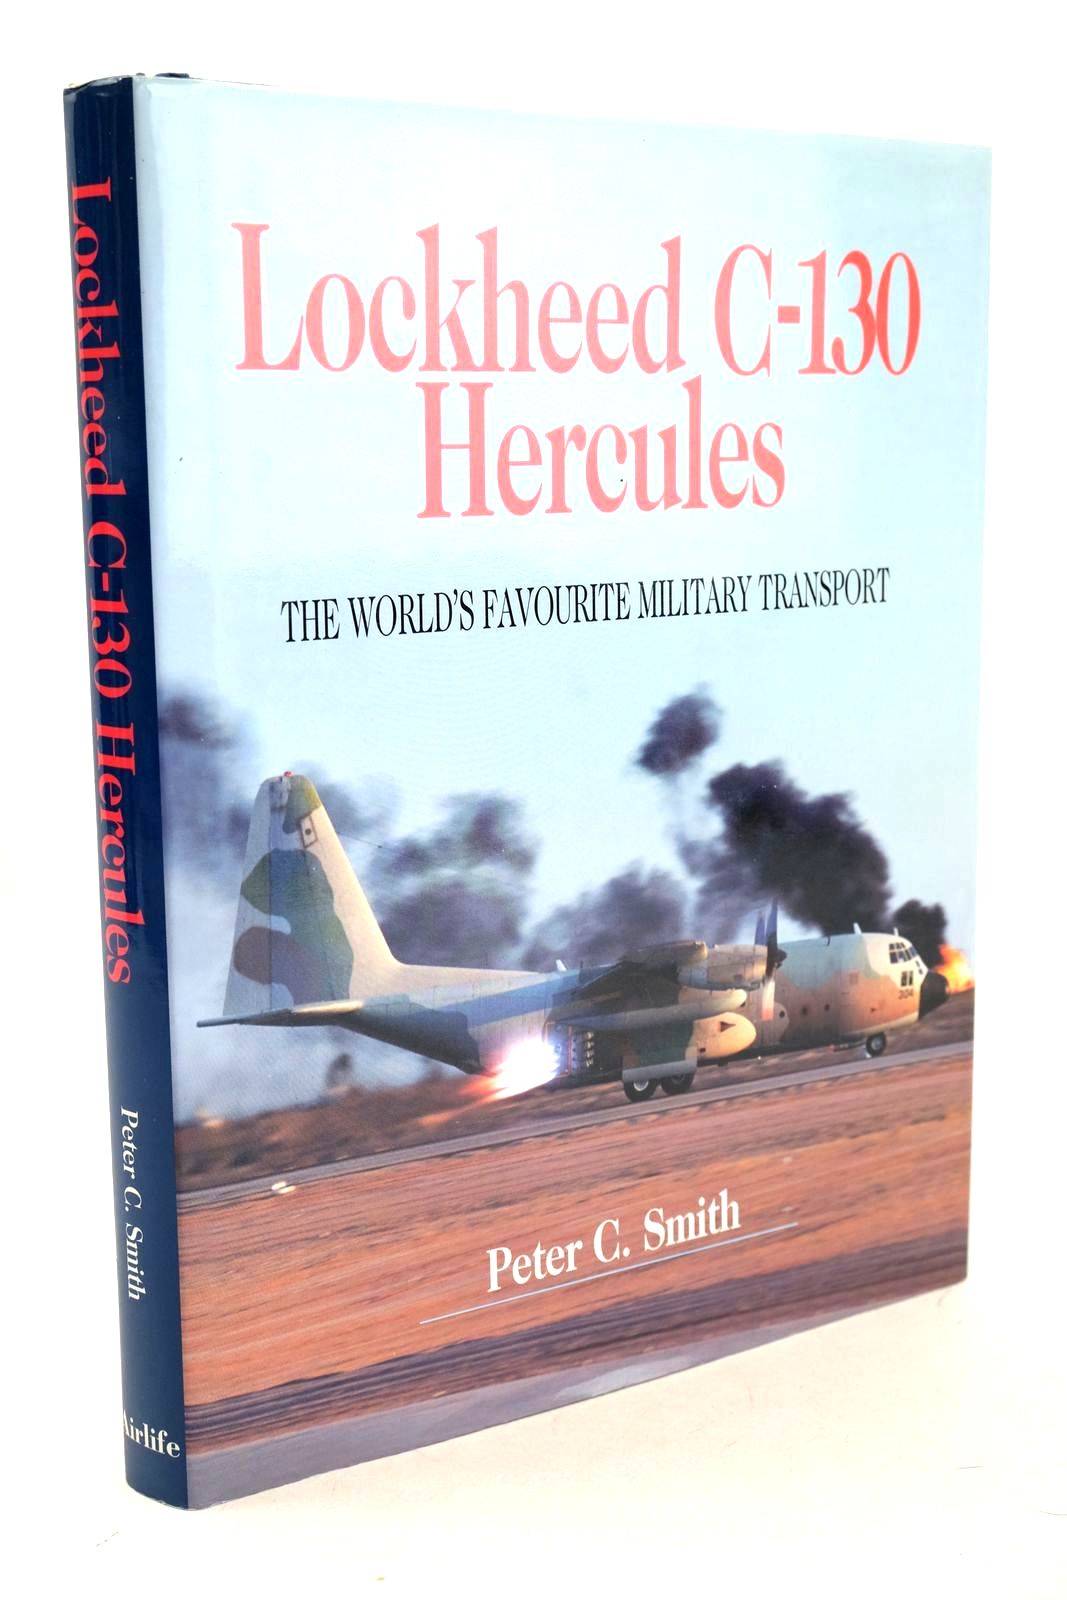 Photo of LOCKHEED C-130 HERCULES written by Smith, Peter C. published by Airlife Publishing Ltd (STOCK CODE: 1326661)  for sale by Stella & Rose's Books